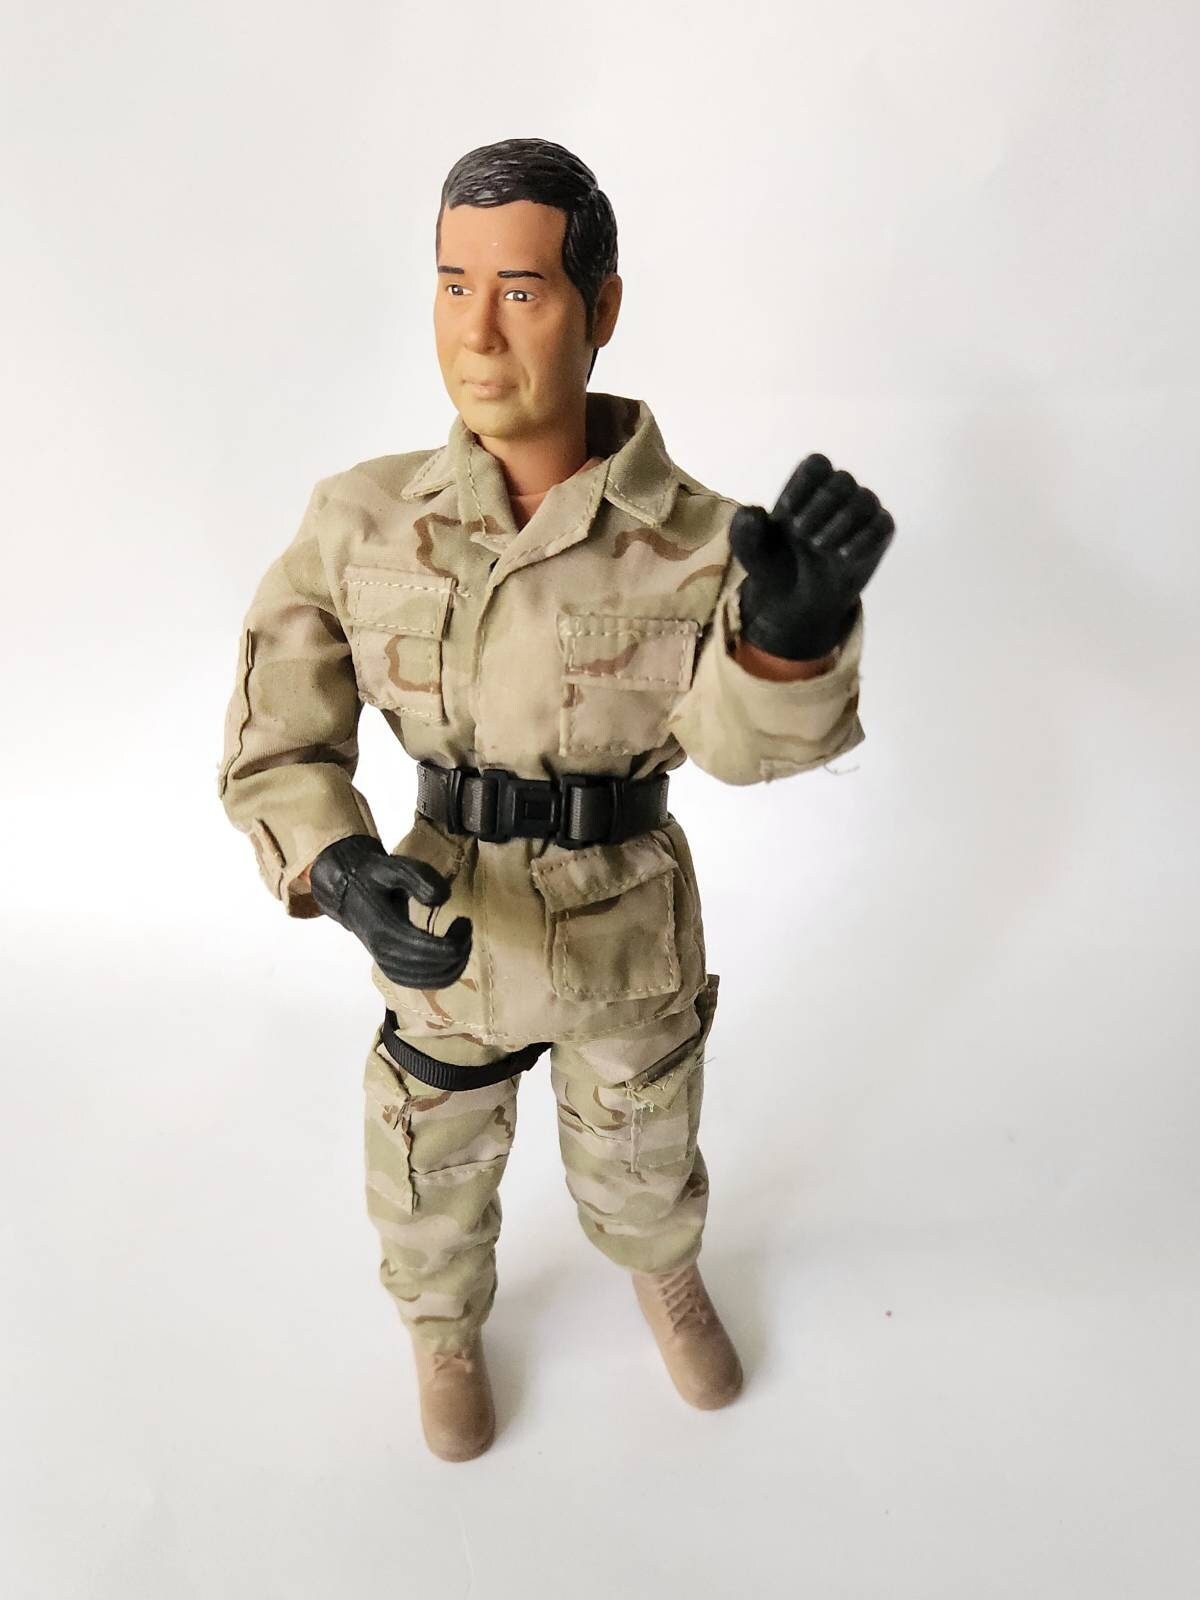 Action Figures, 12 Inch Tall, Army Soldiers, Articulated Military